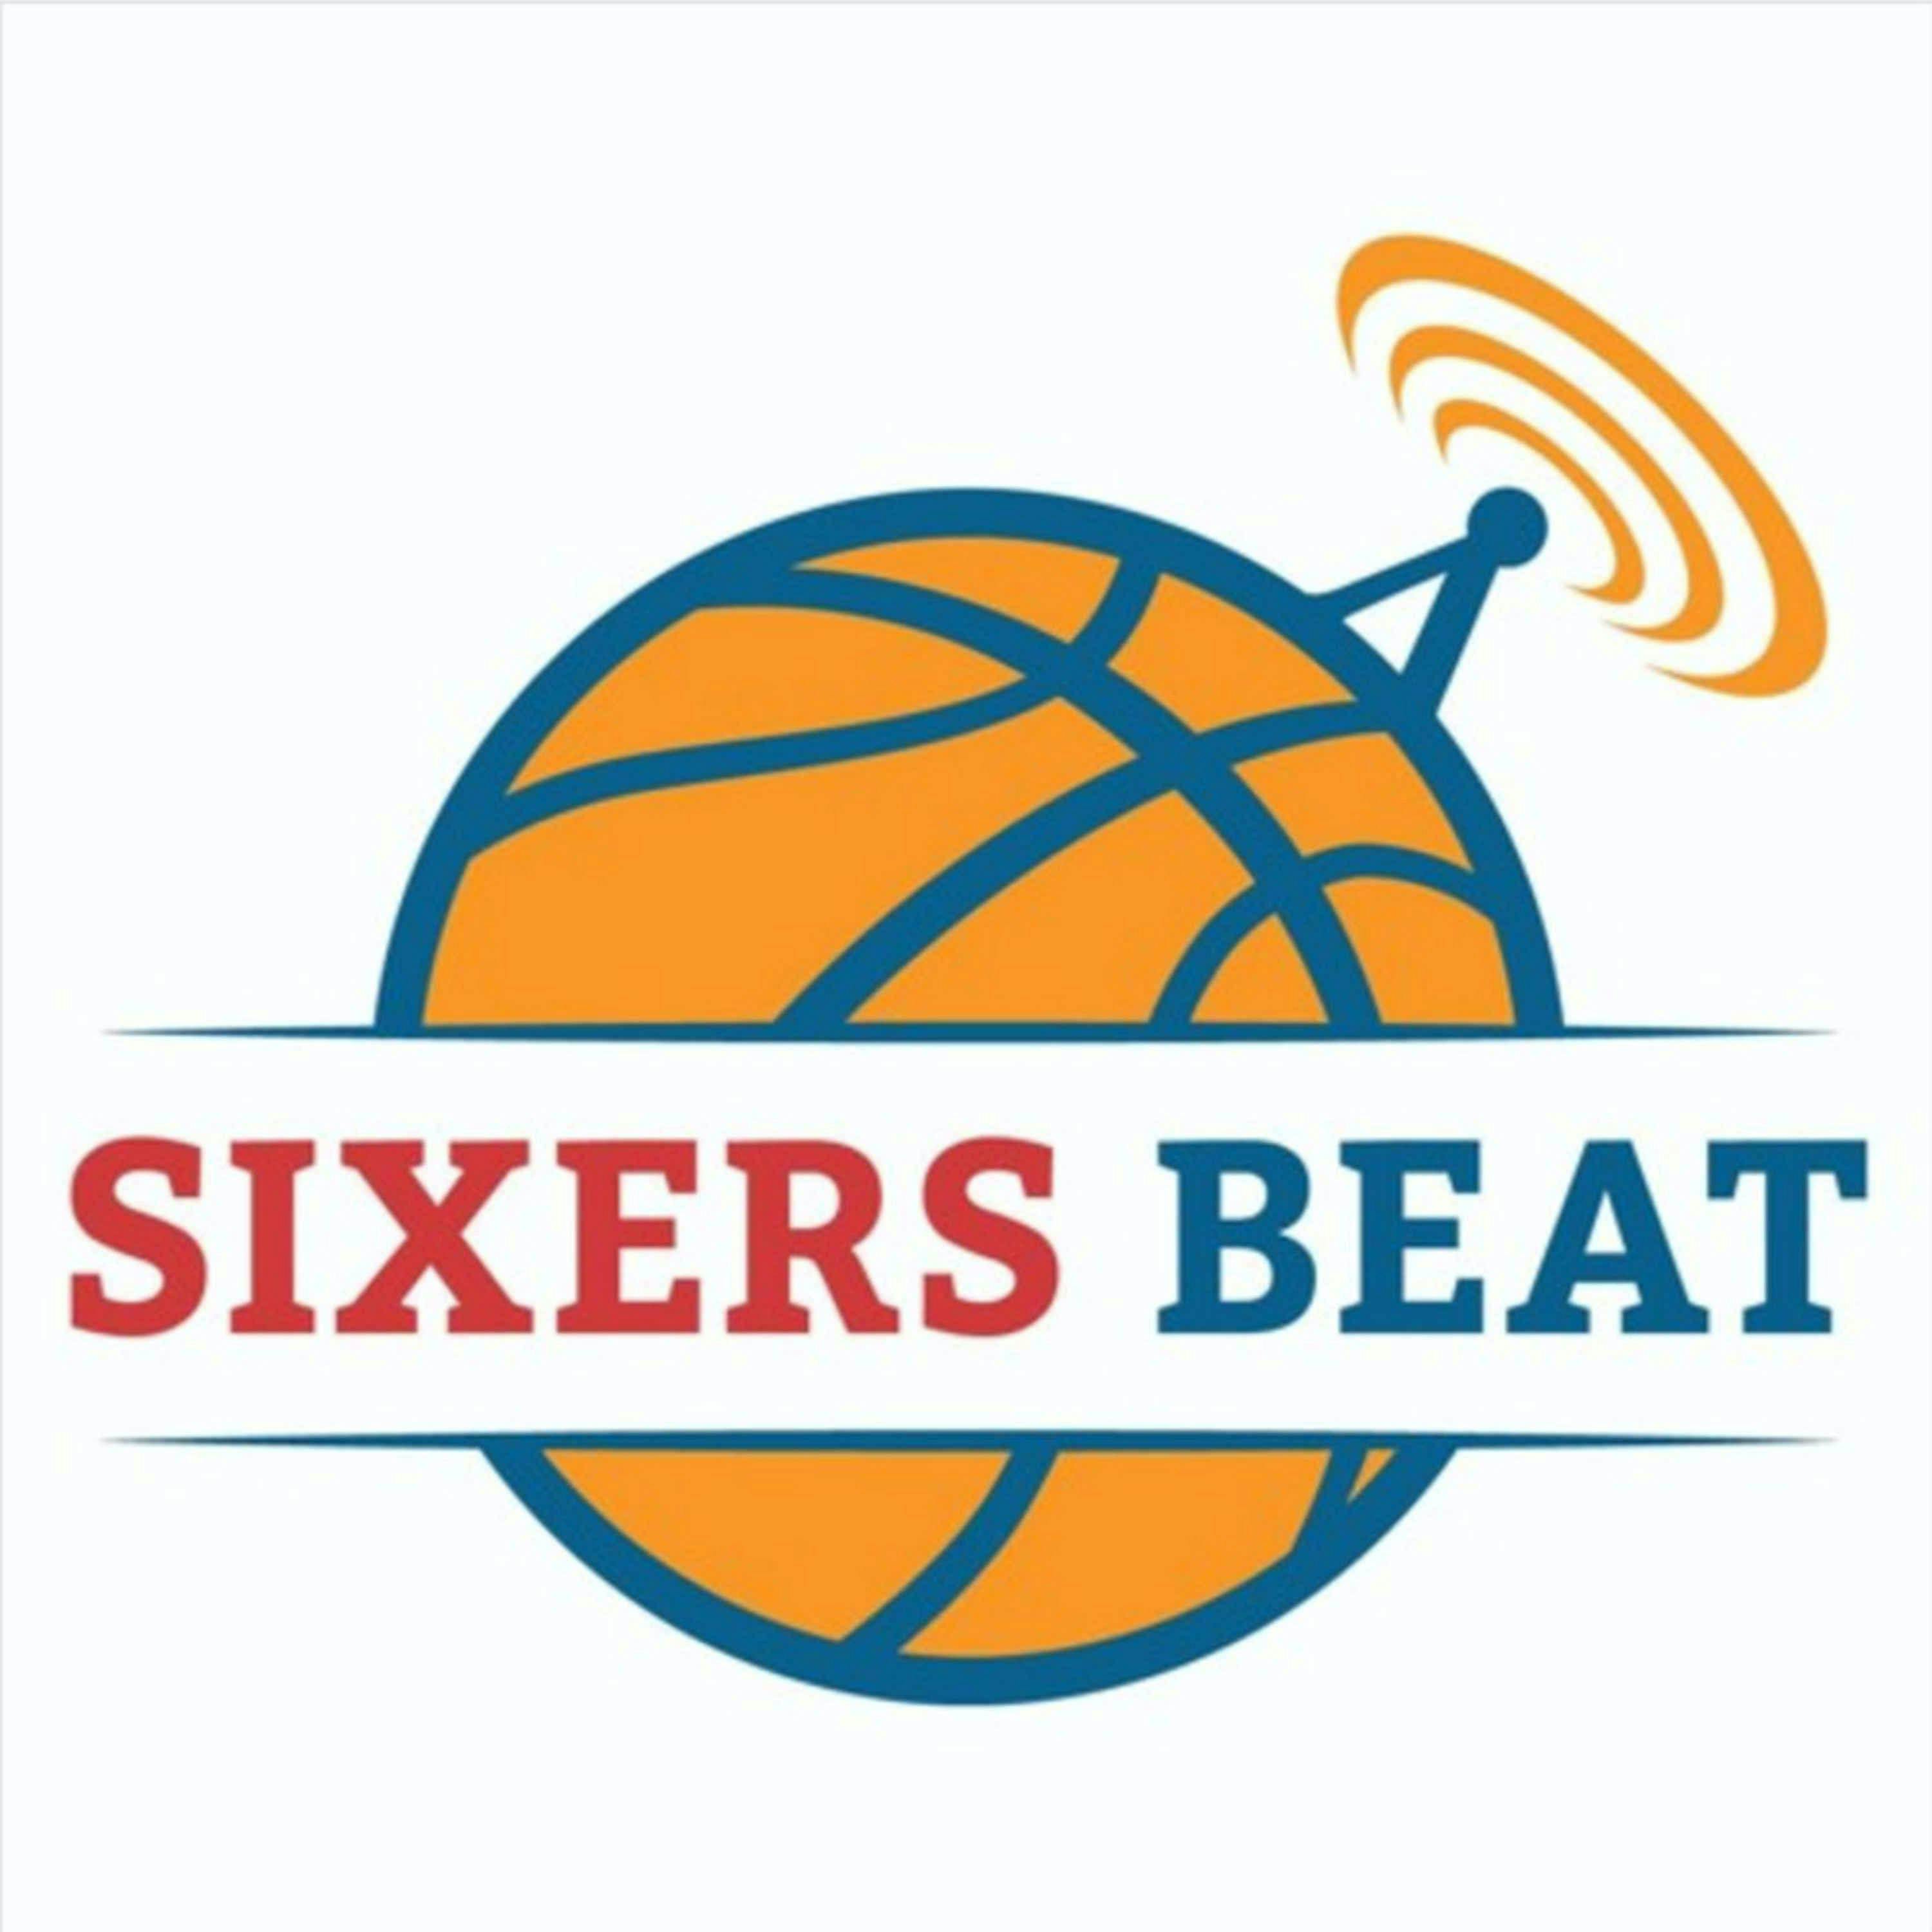 #137 - Can the Sixers get a top-4 seed?